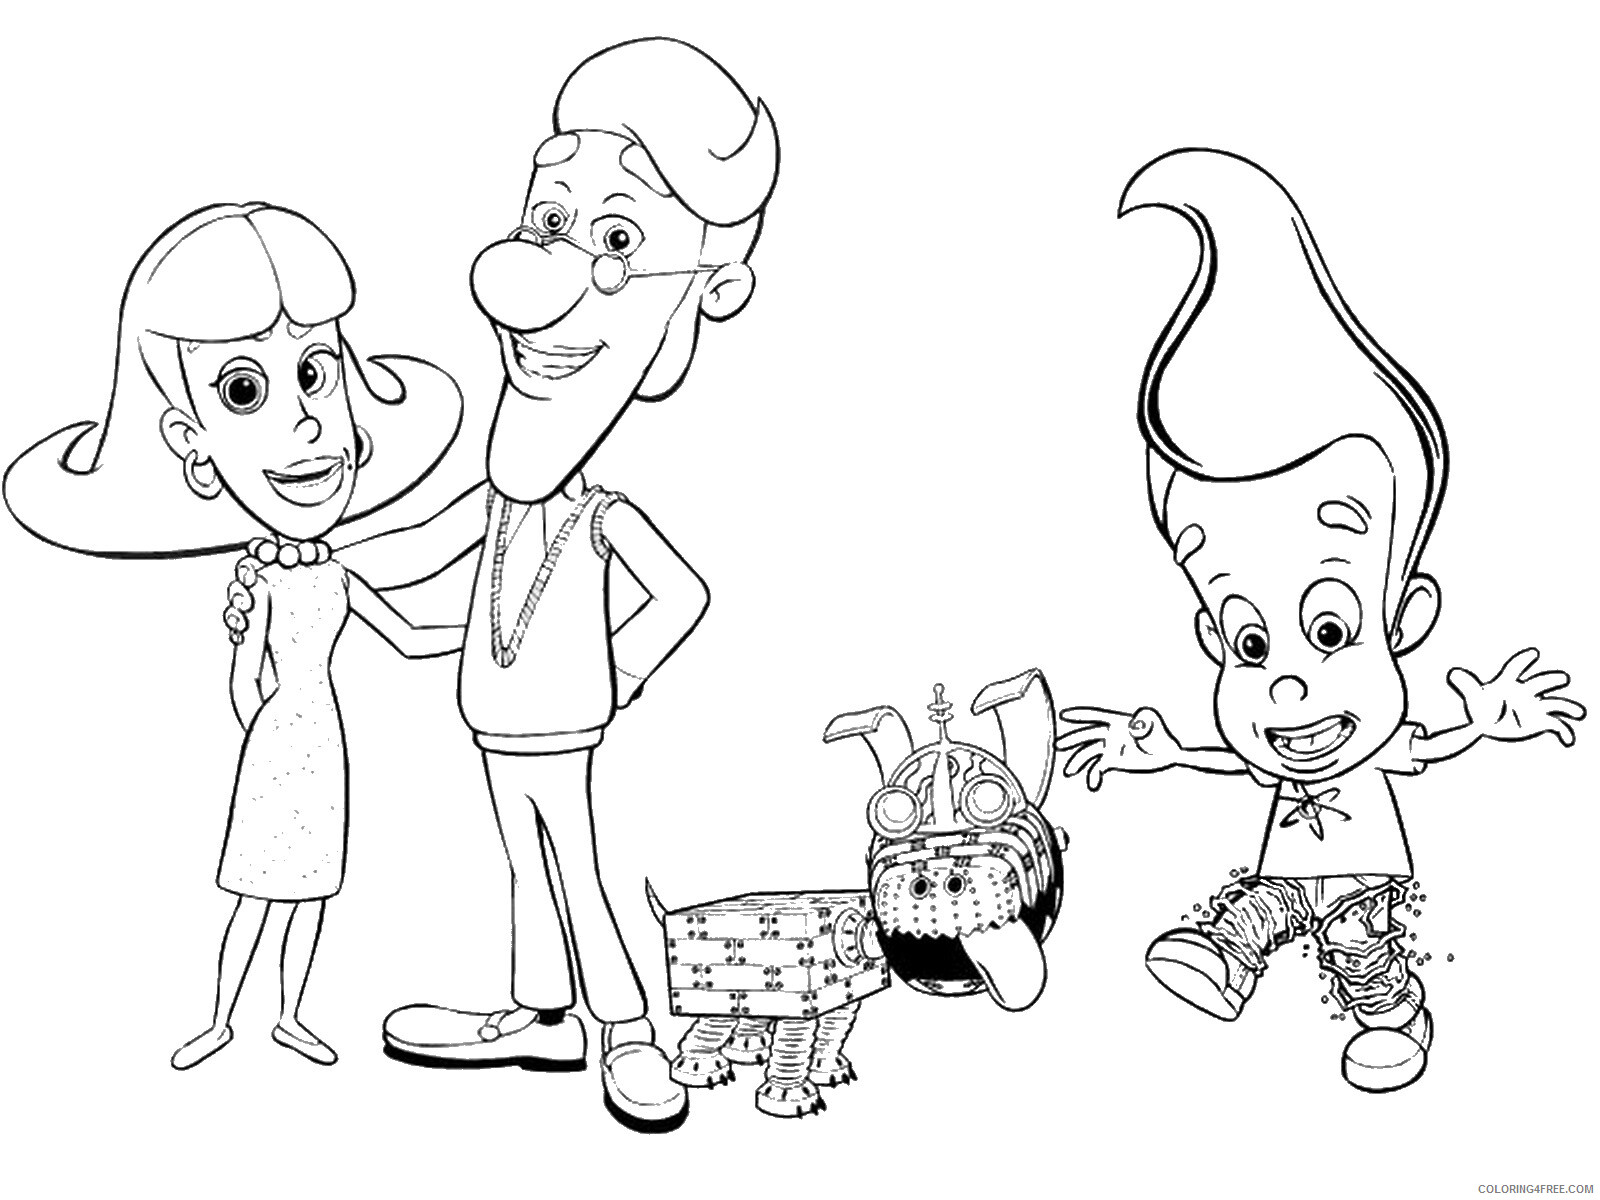 Jimmy Neutron Coloring Pages TV Film jimmy_neutron_cl30 Printable 2020 04143 Coloring4free